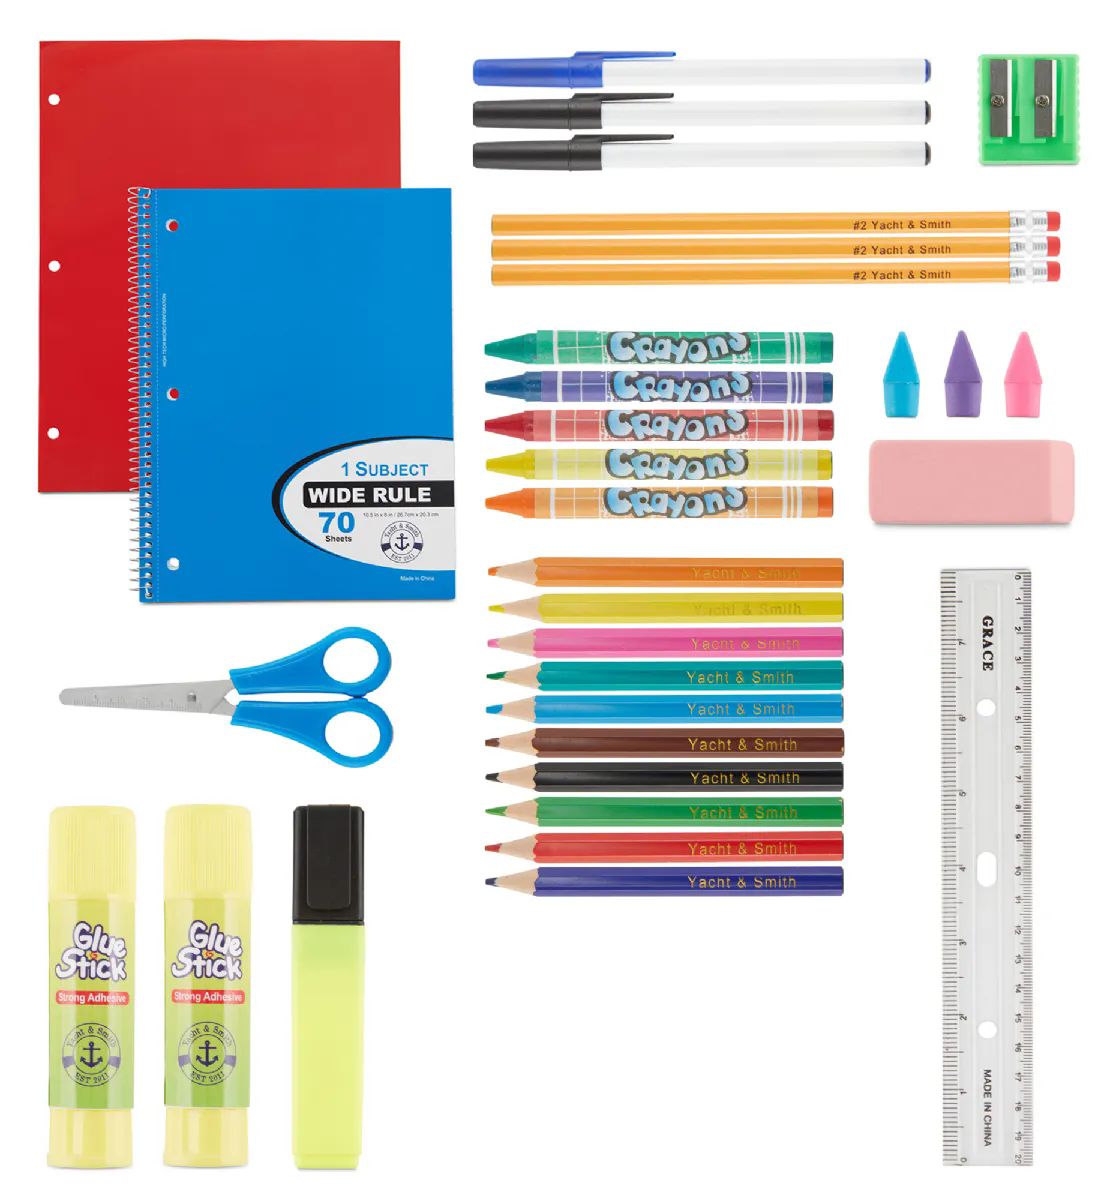 24 Sets of Yacht & Smith 34 Pack Preassembled School Supply Kit K-12